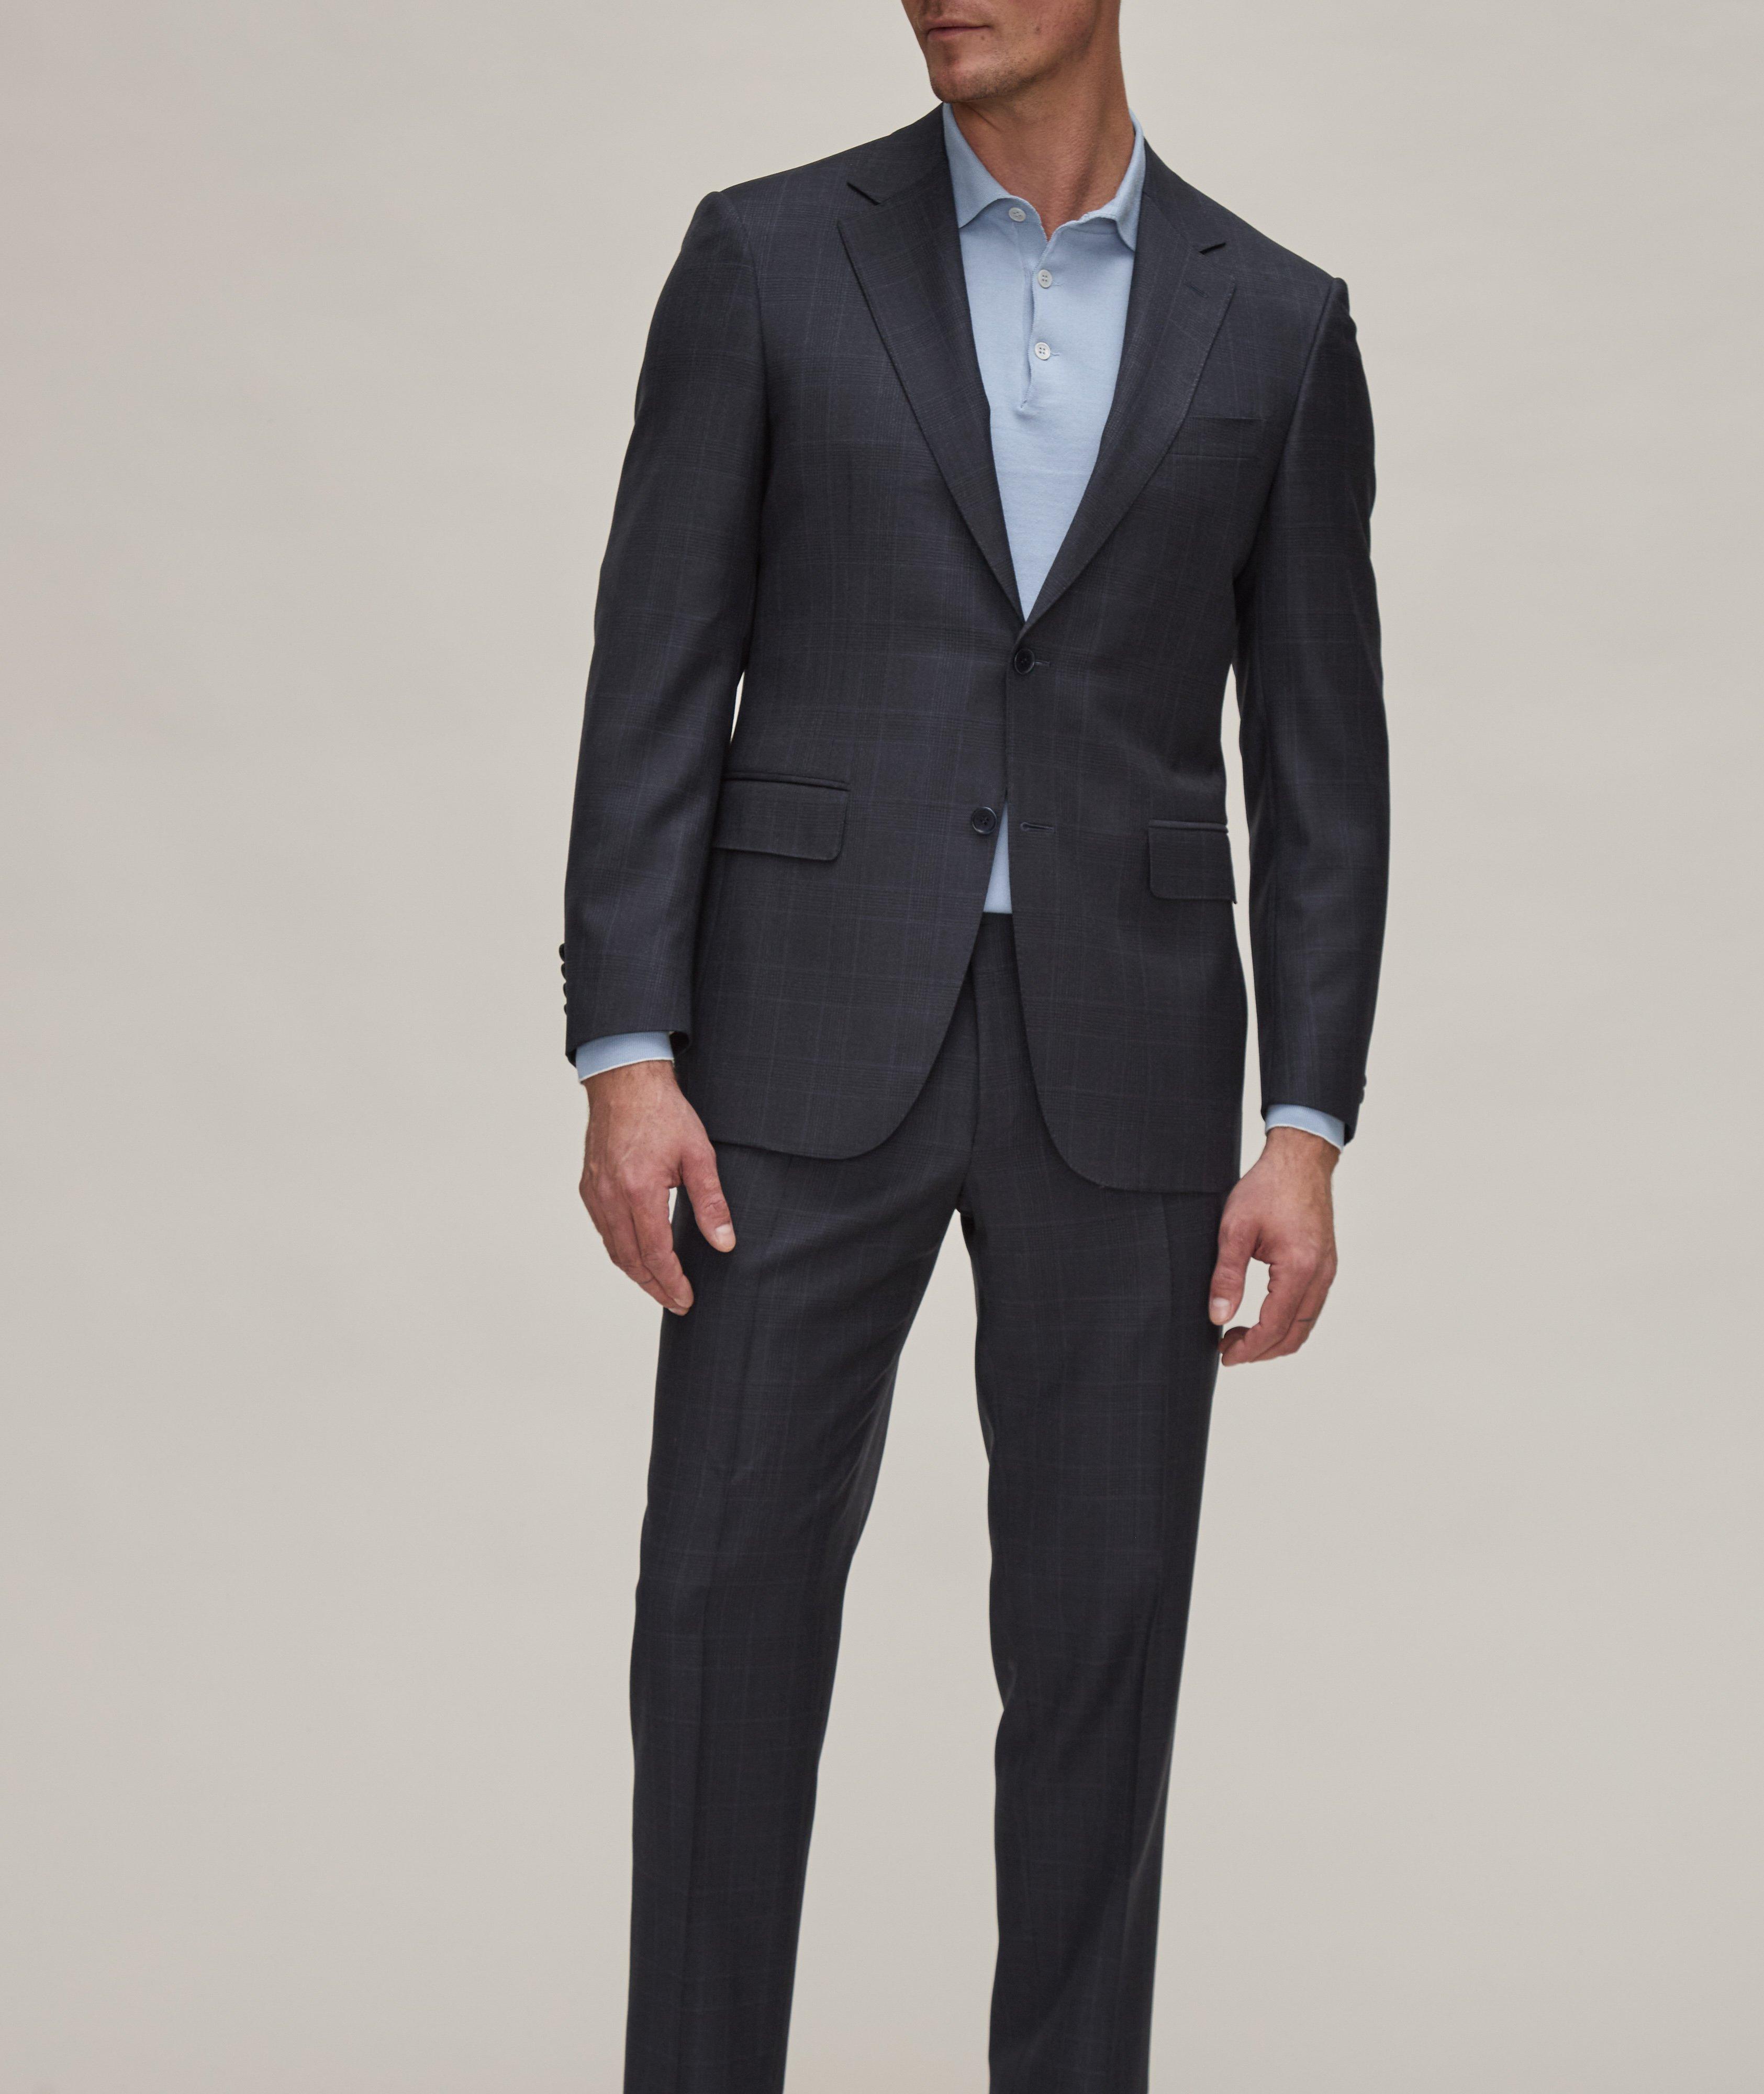 Contemporary Line Glen Check Wool Suit image 1